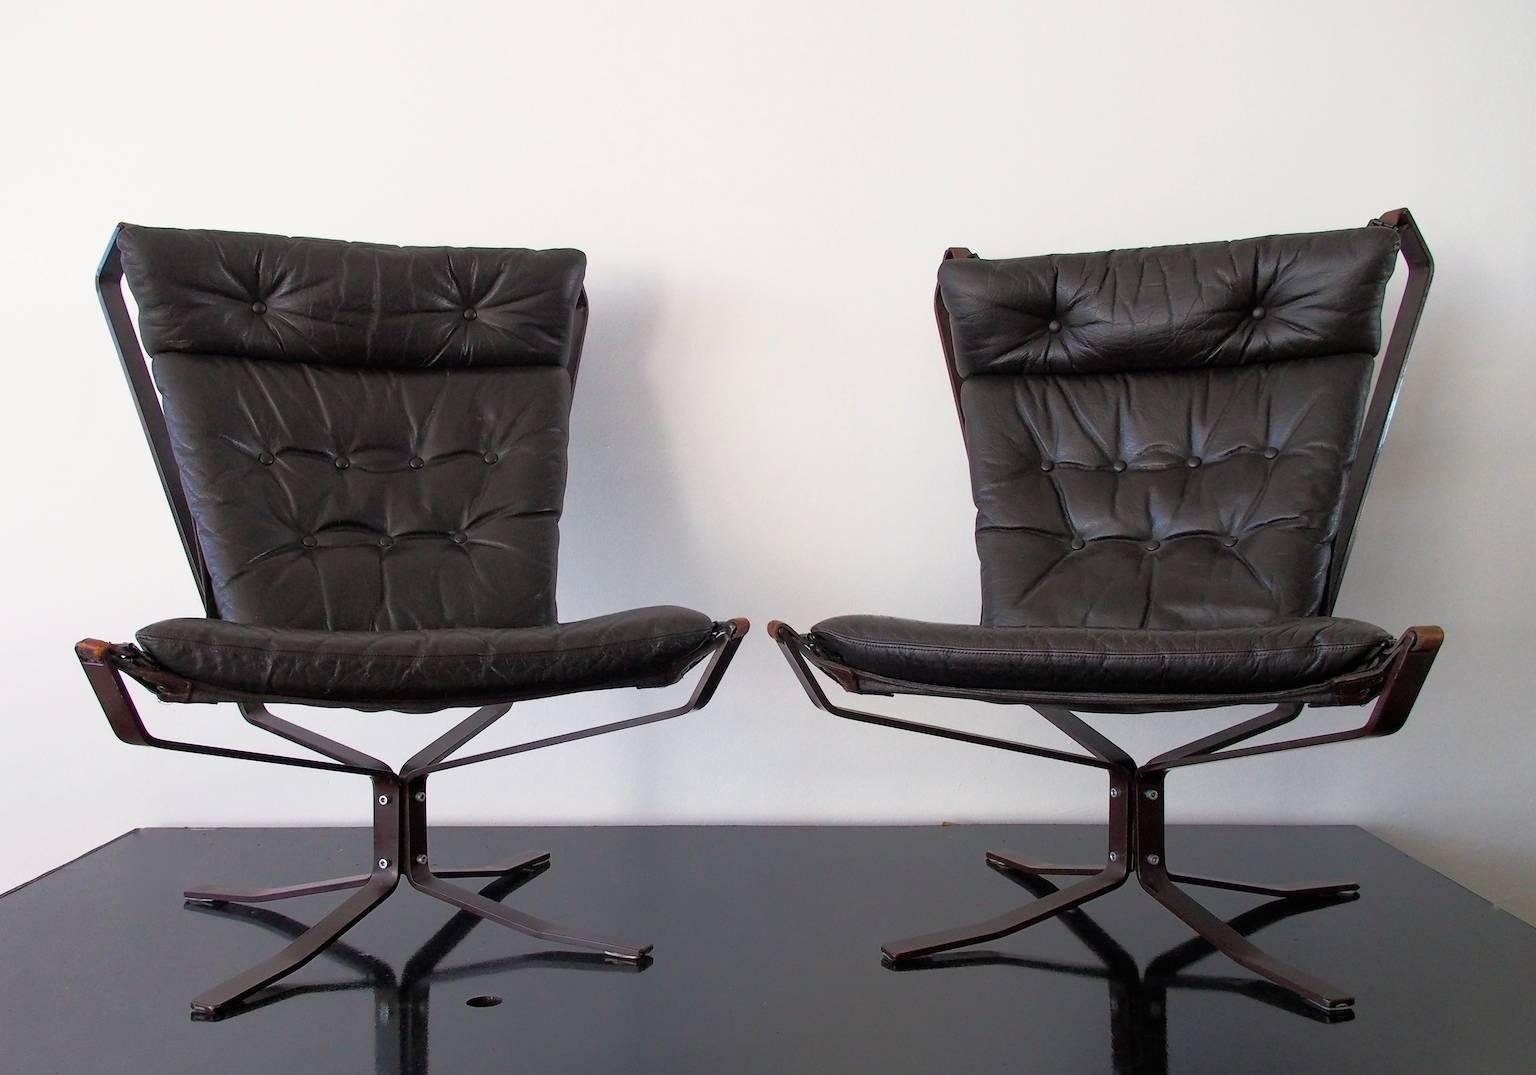 Pair of dark brown leather Falcon chairs with high back on X-shaped steel frame by Norwegian designer Sigurd Ressel, circa 1970s. Beautiful leather details, very comfortable.